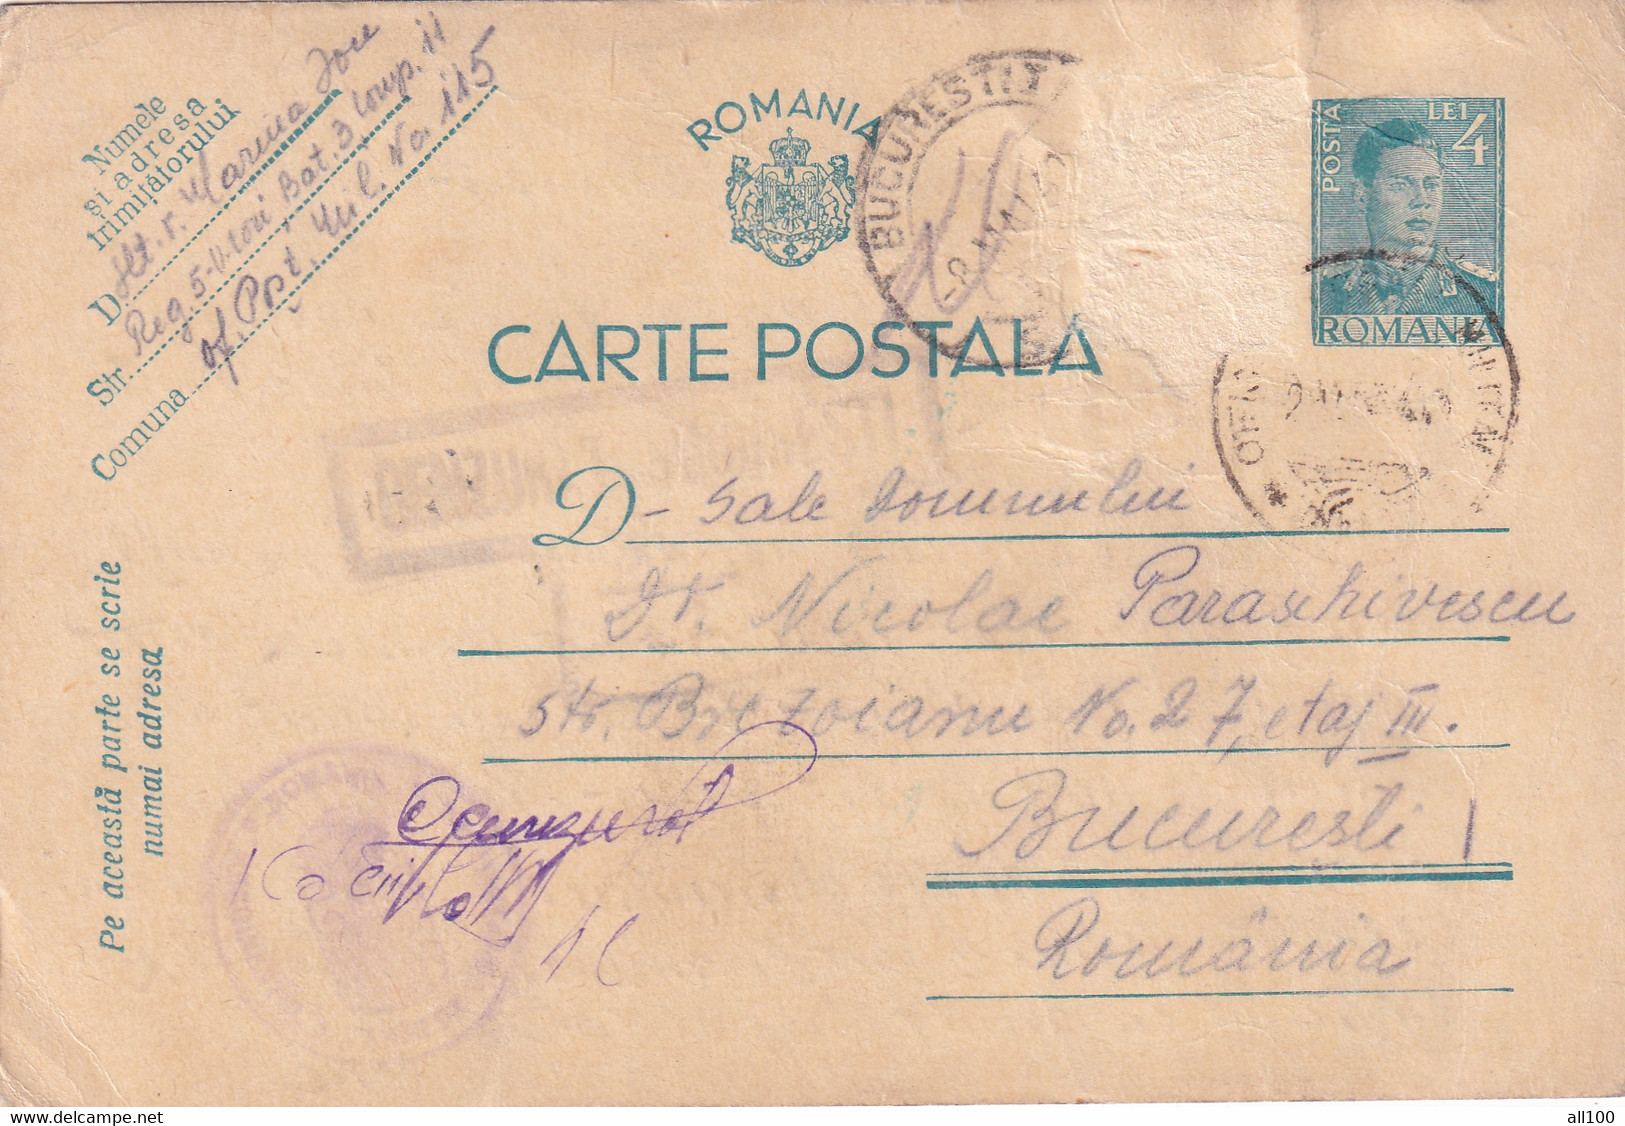 A16411 - MILITARY LETTER CENZURAT CENZORED KING MICHAEL 4 LEI POSTAL STATIONERY 1942 - 2. Weltkrieg (Briefe)